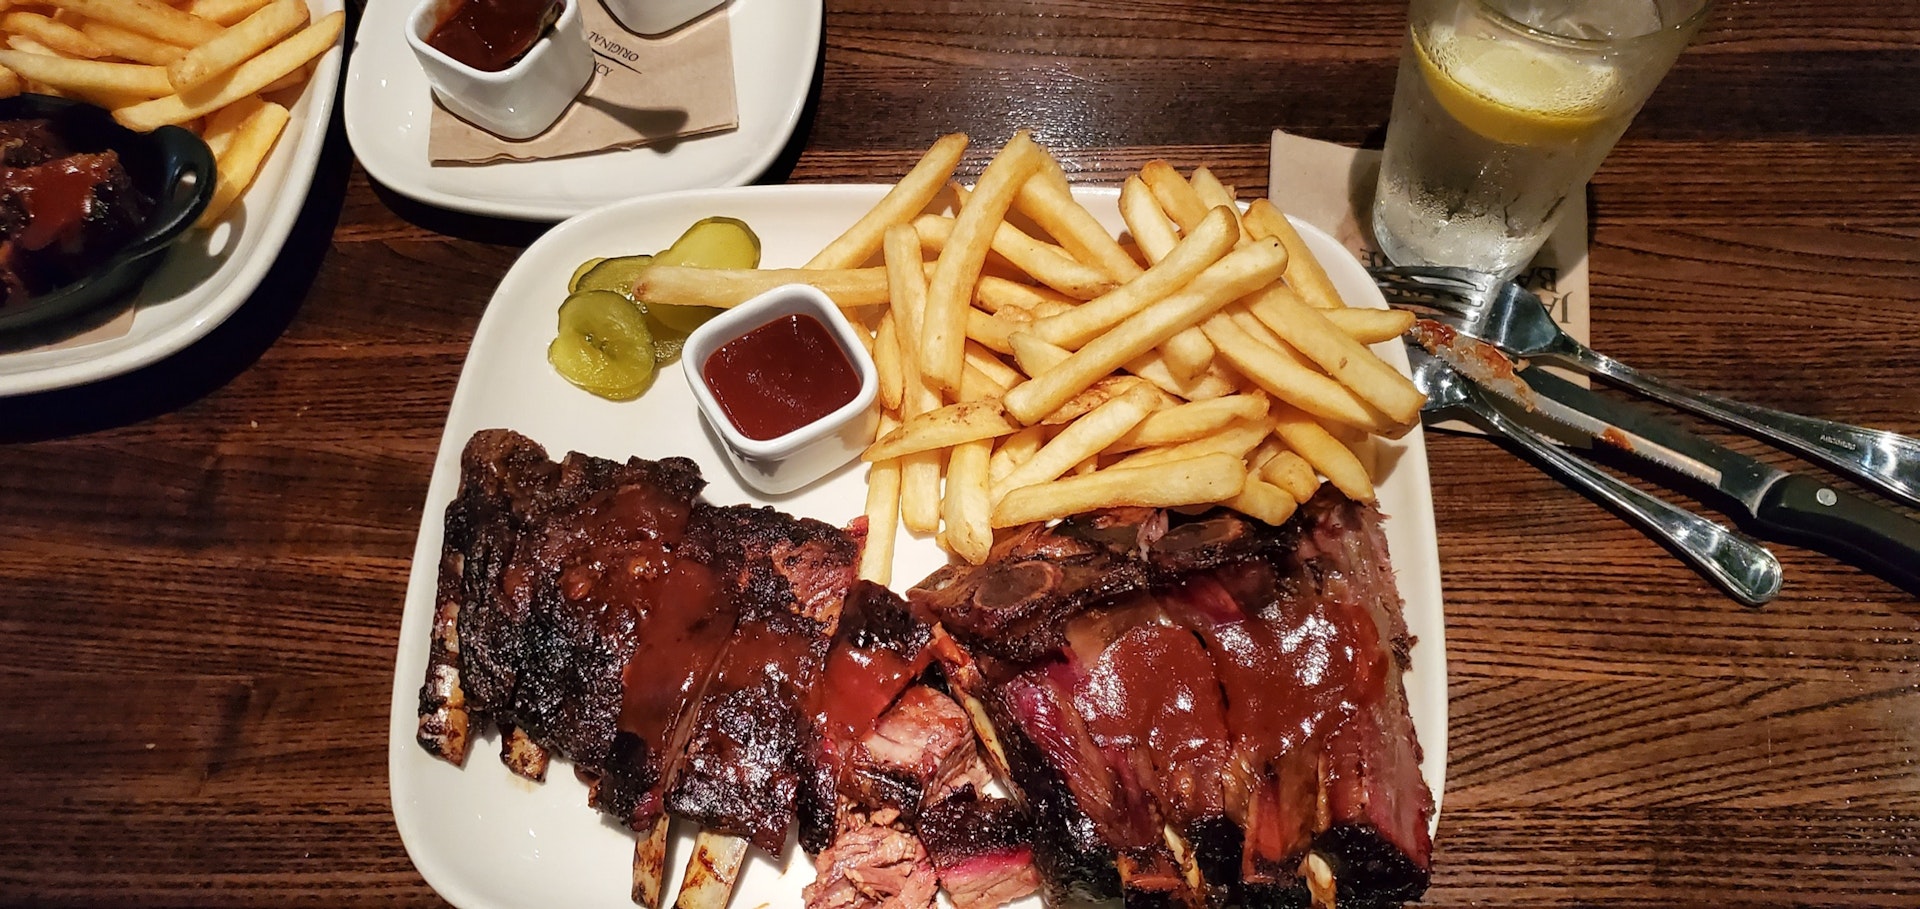 Kansas City pit masters barbecue ribs, brisket, pork and chicken slathered with sauces.